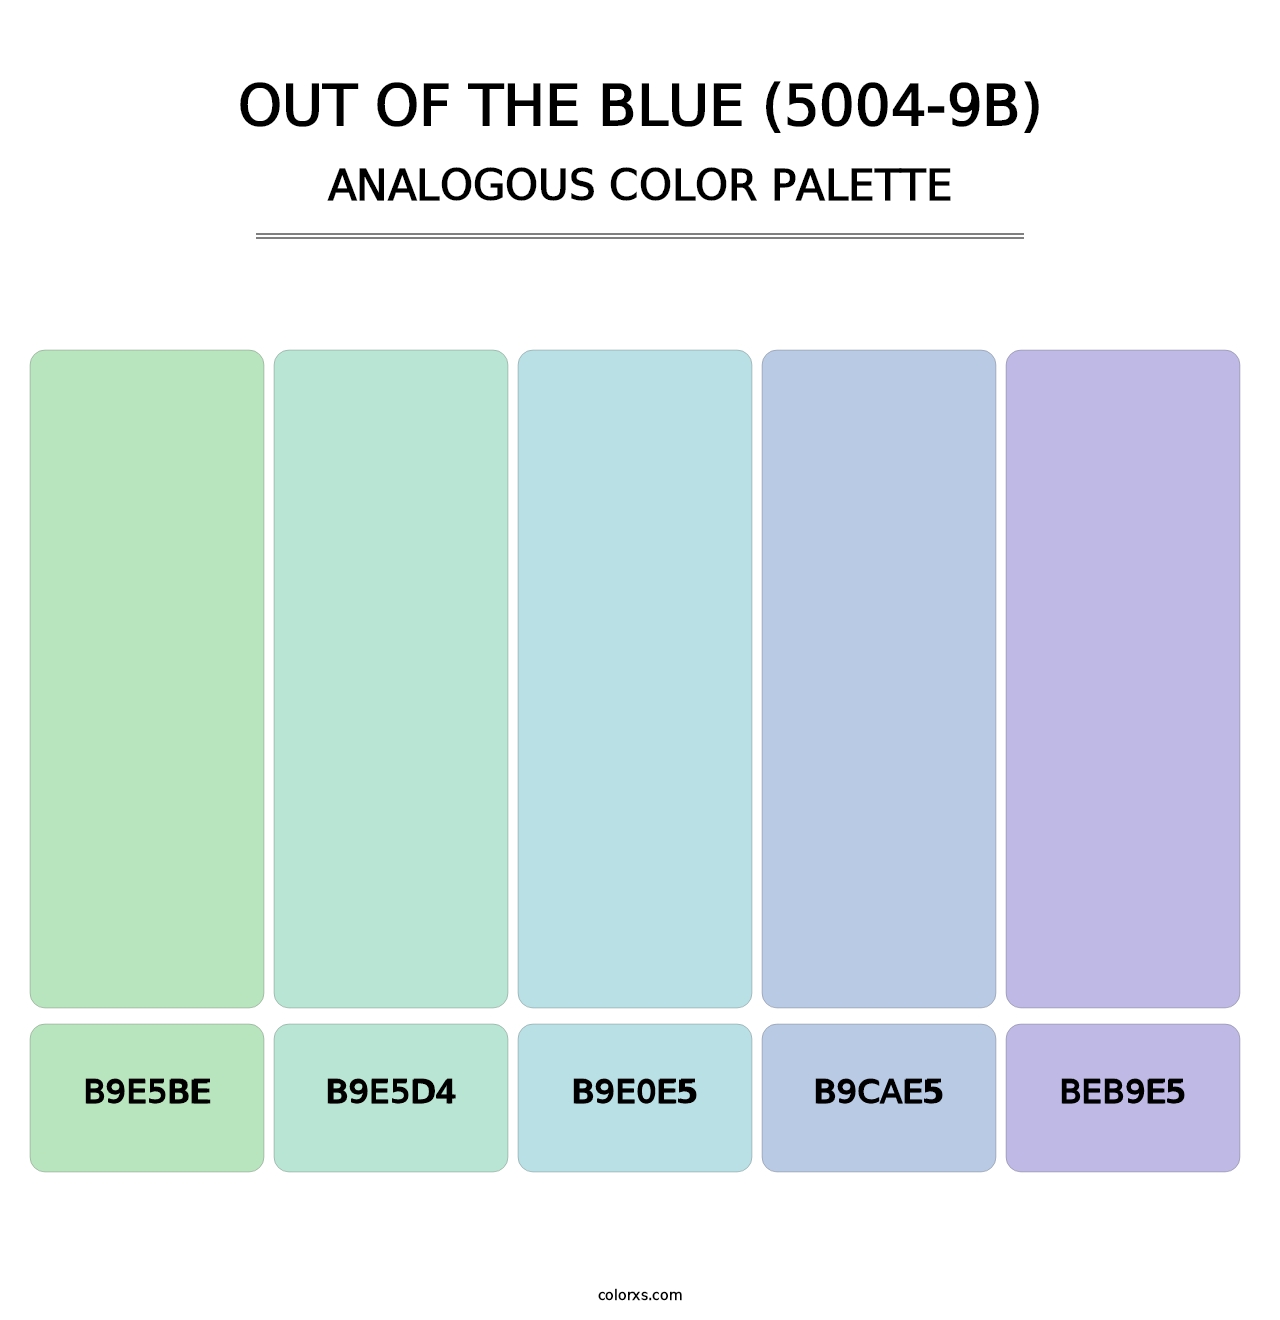 Out of the Blue (5004-9B) - Analogous Color Palette